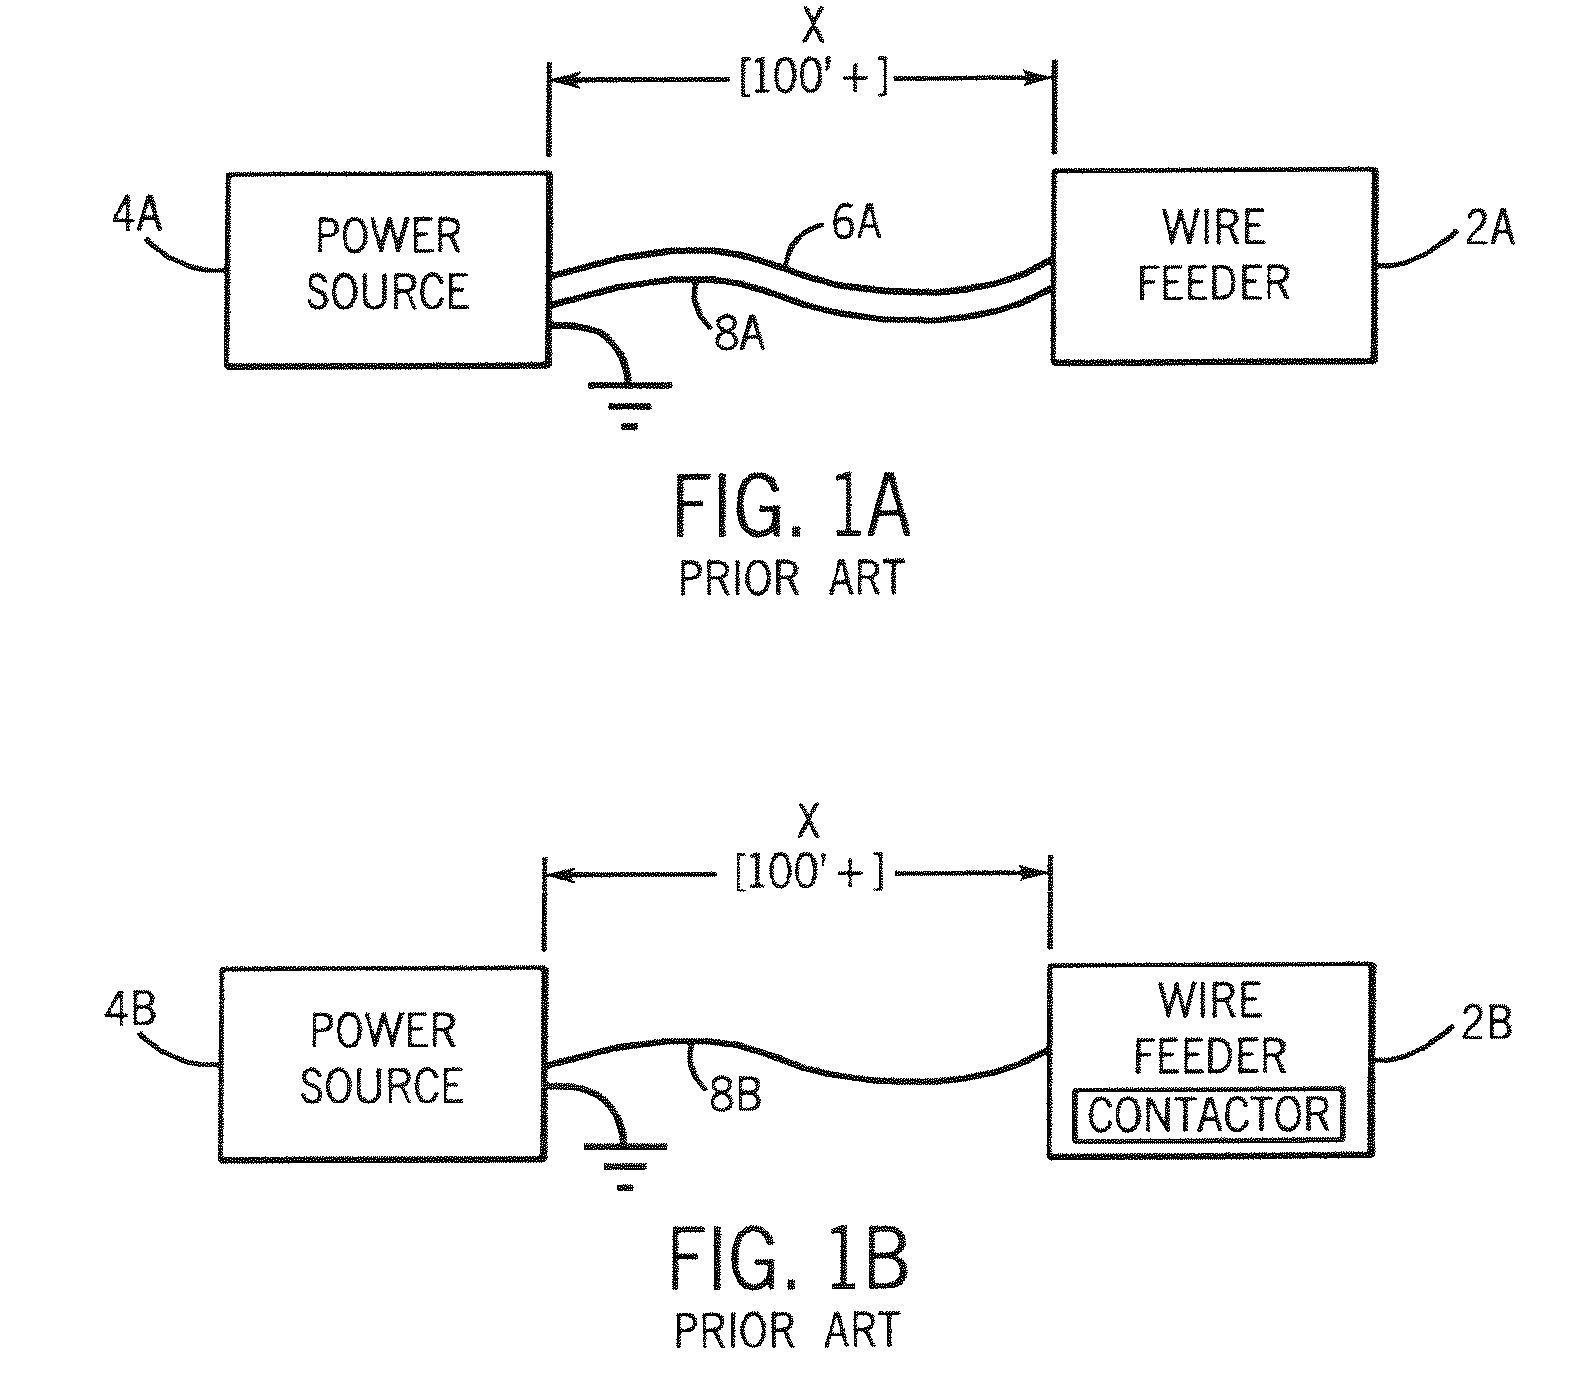 Method and system for a remote wire feeder where standby power and system control are provided via weld cables